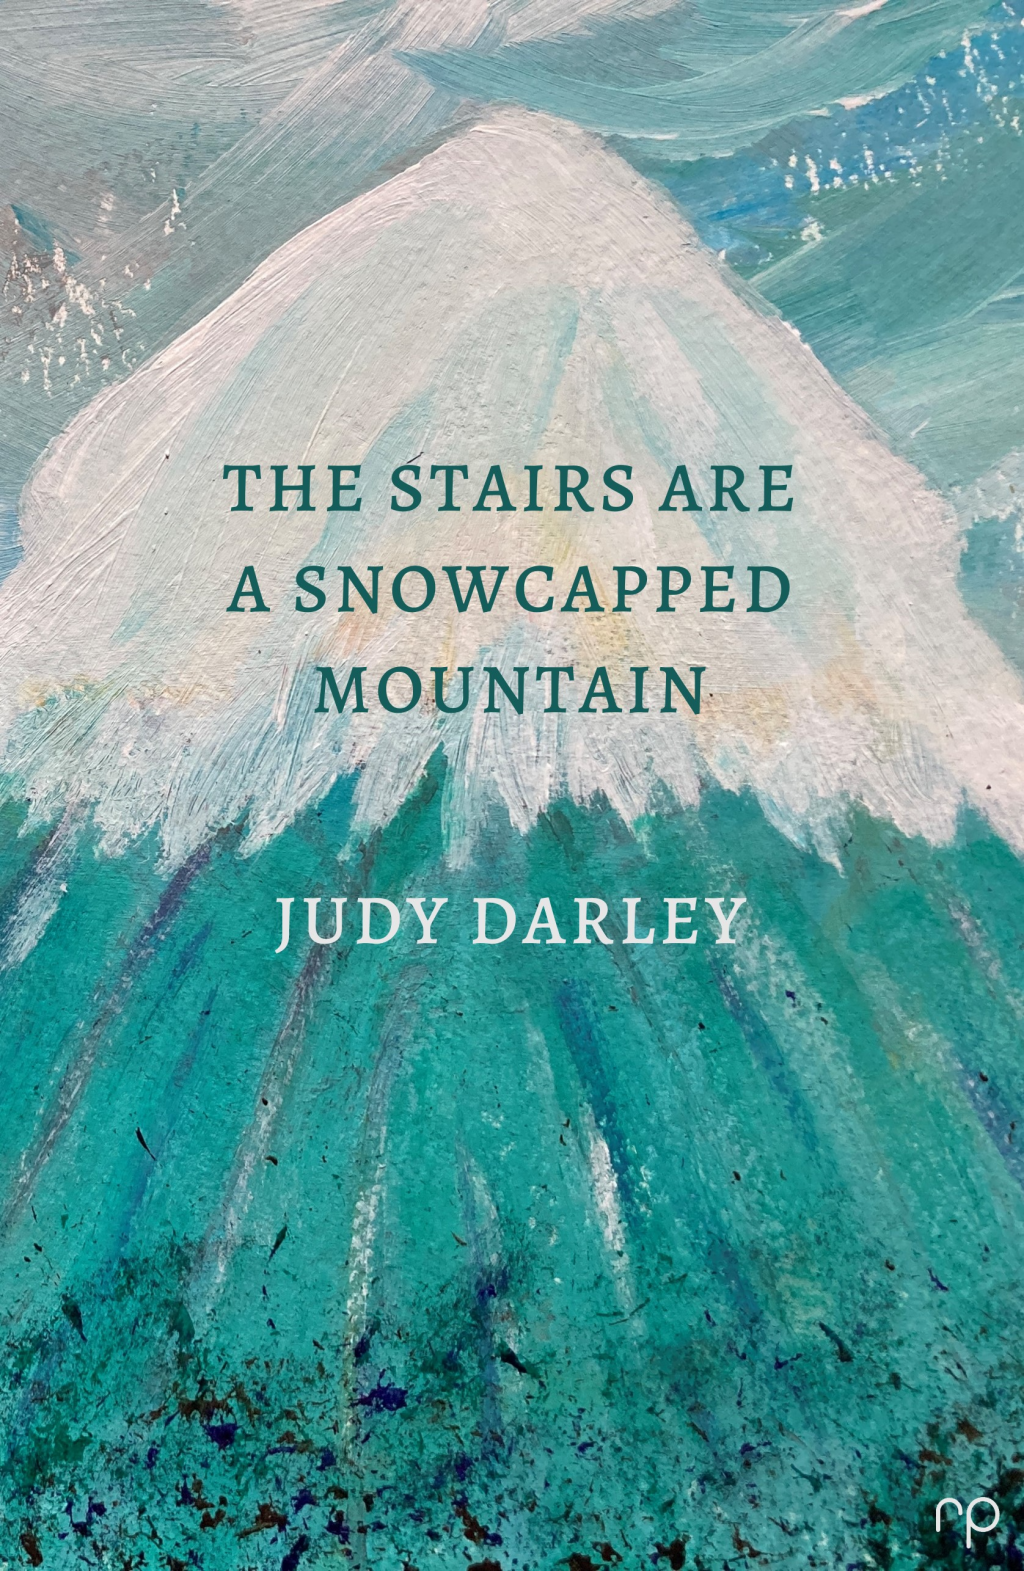 Review: ‘The Stairs are a Snowcapped Mountain’ by Judy Darley